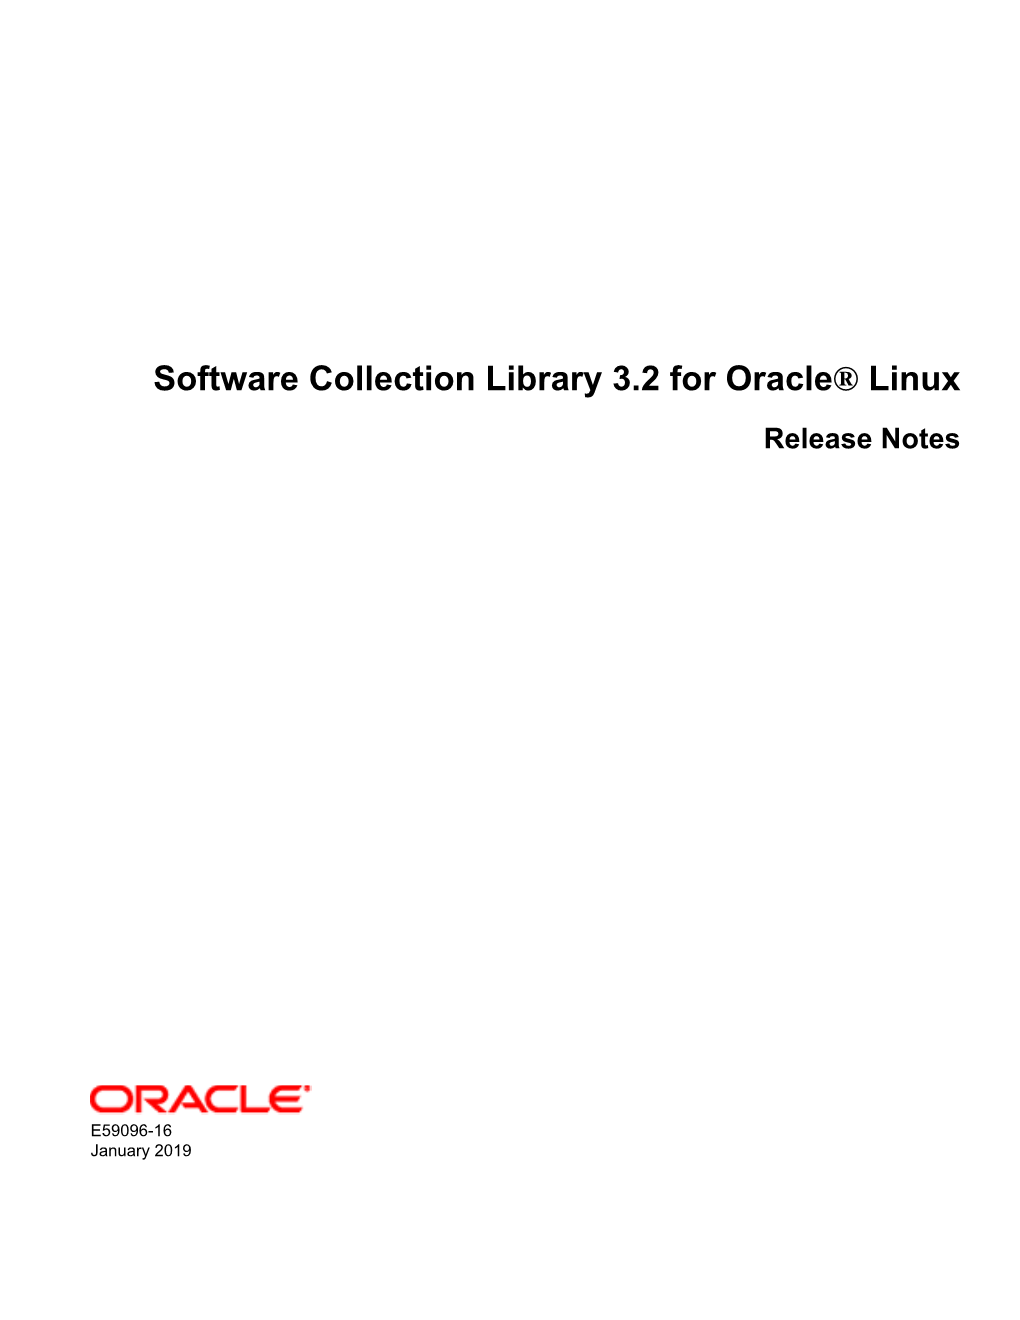 Software Collection Library 3.2 for Oracle® Linux Release Notes